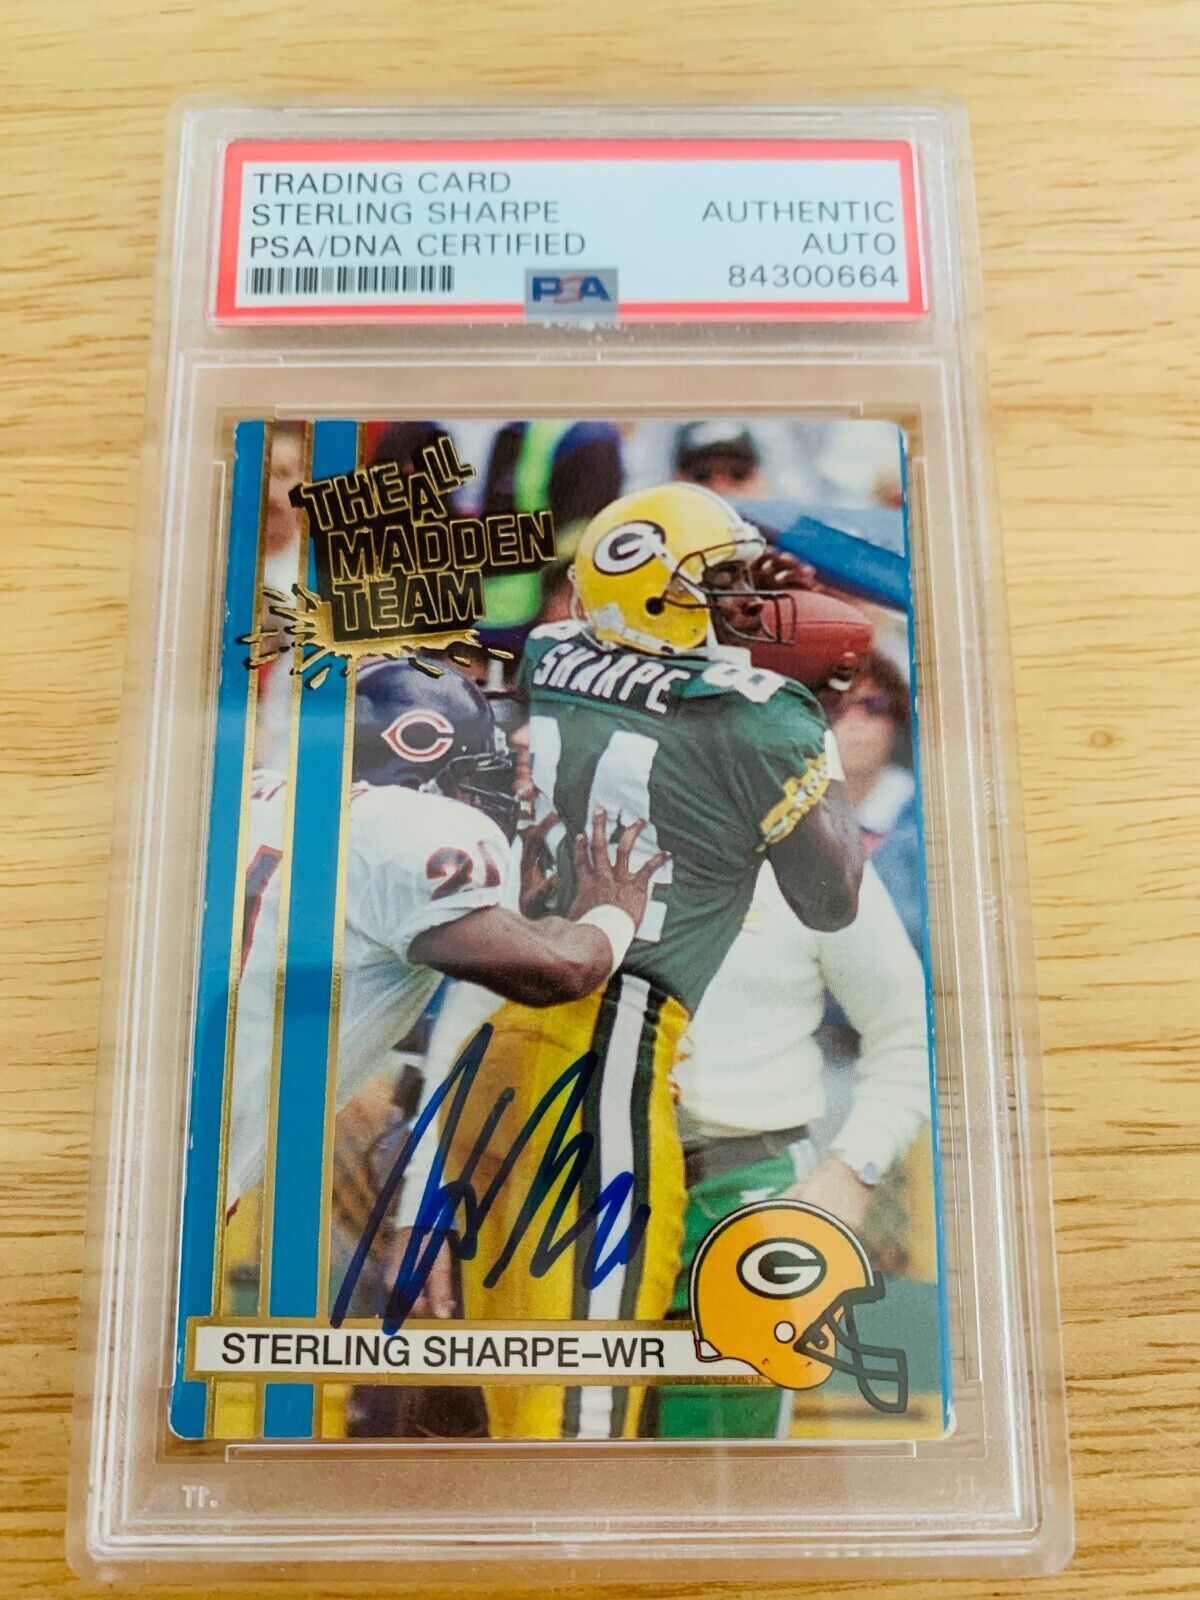 Sterling Sharpe Autographed 1990 Action Packed AM Card PSA Certified Slabbed